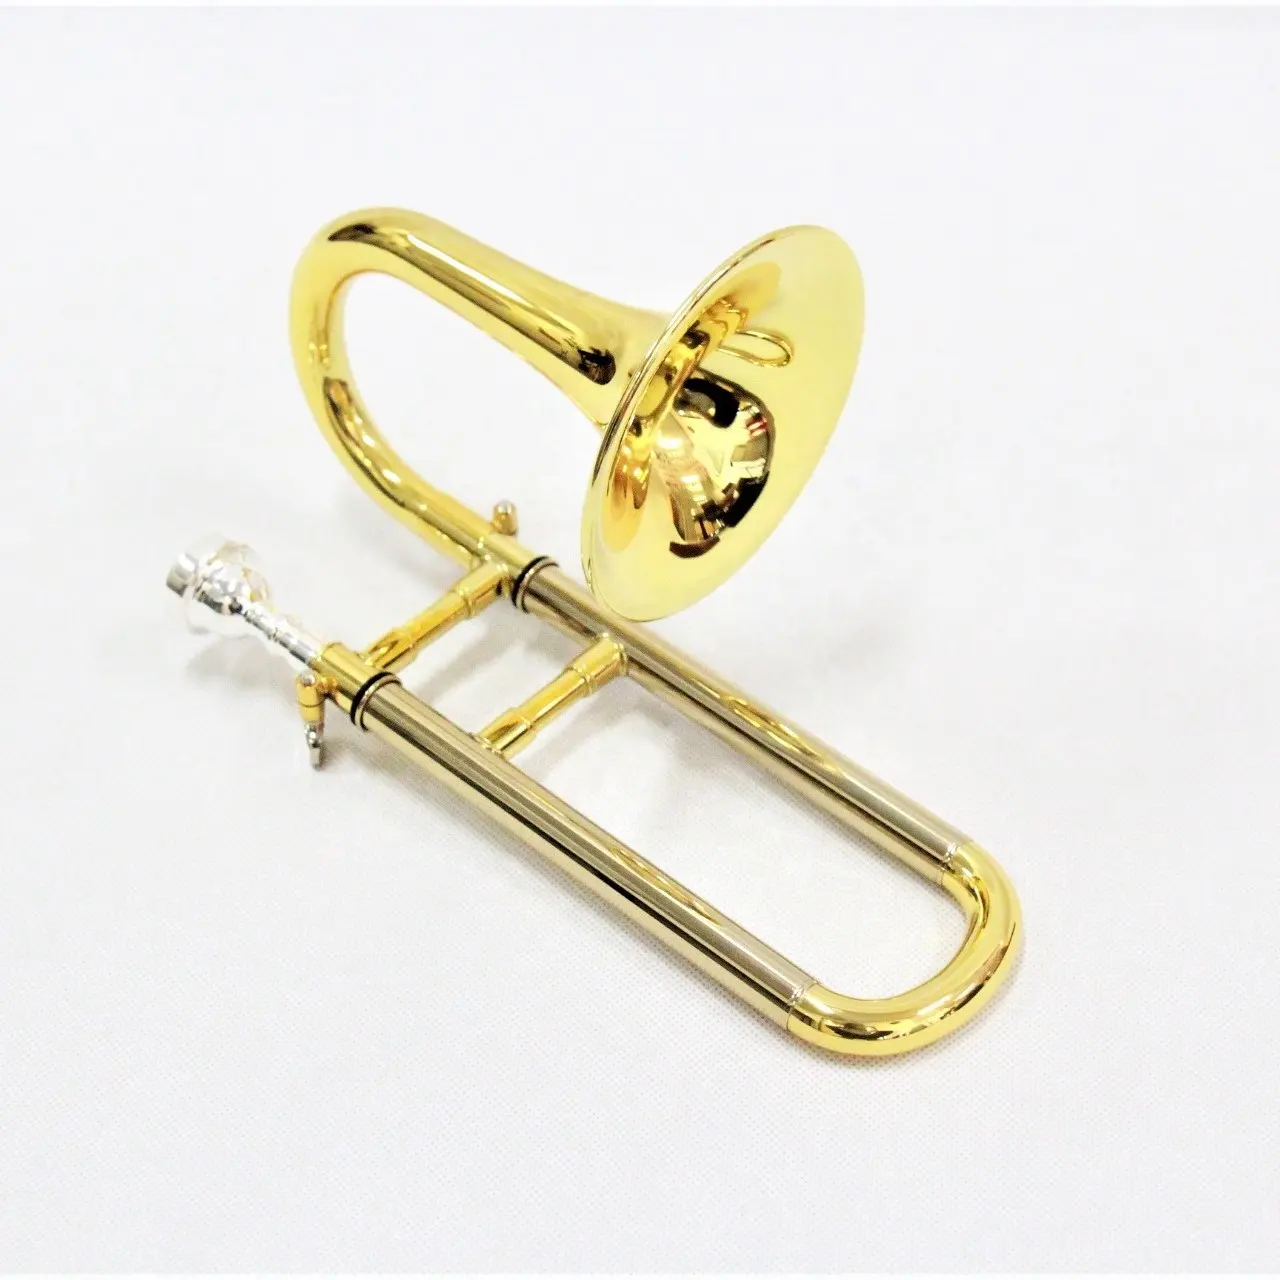 Chinese economical slide trumpet piccolo trombone for sale high quality trombone in stock gold lacquered Bb/A piccolo trombone